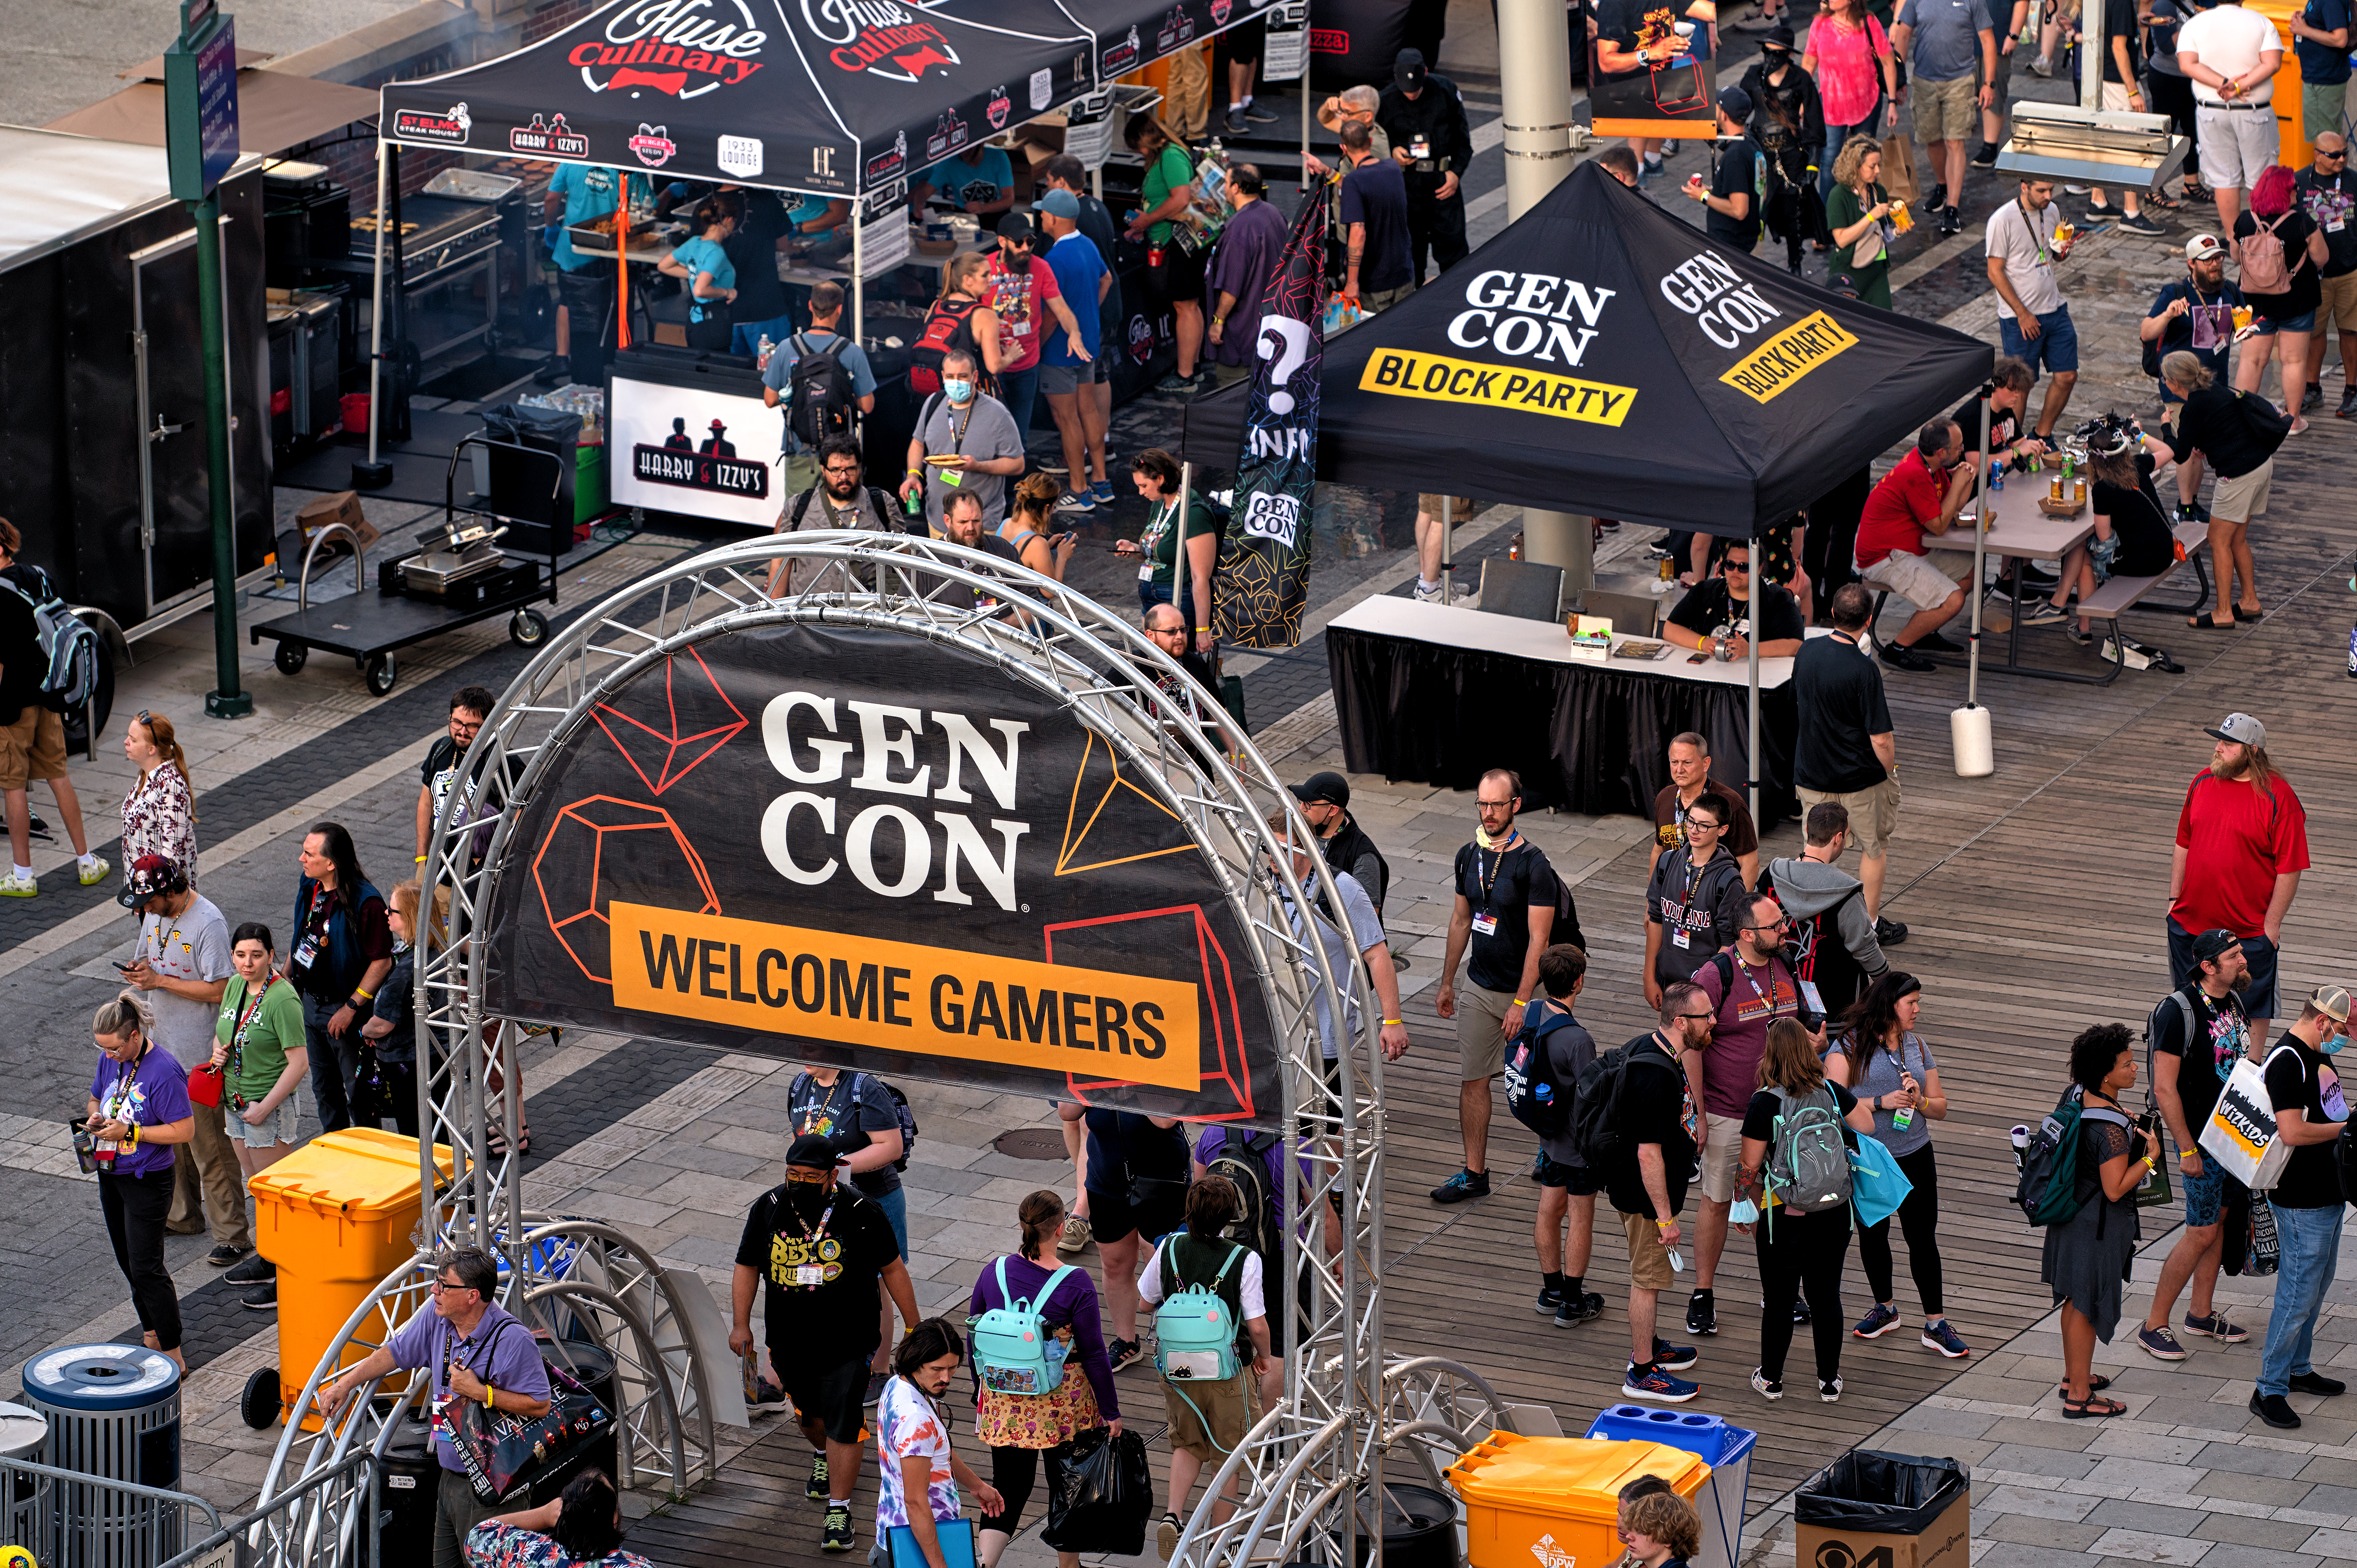 A view of the food trucks at Gen Con. An arch holds a banner that reads “Welcome Gaming News, Video Game Reviews, and Game Guidesrs!”